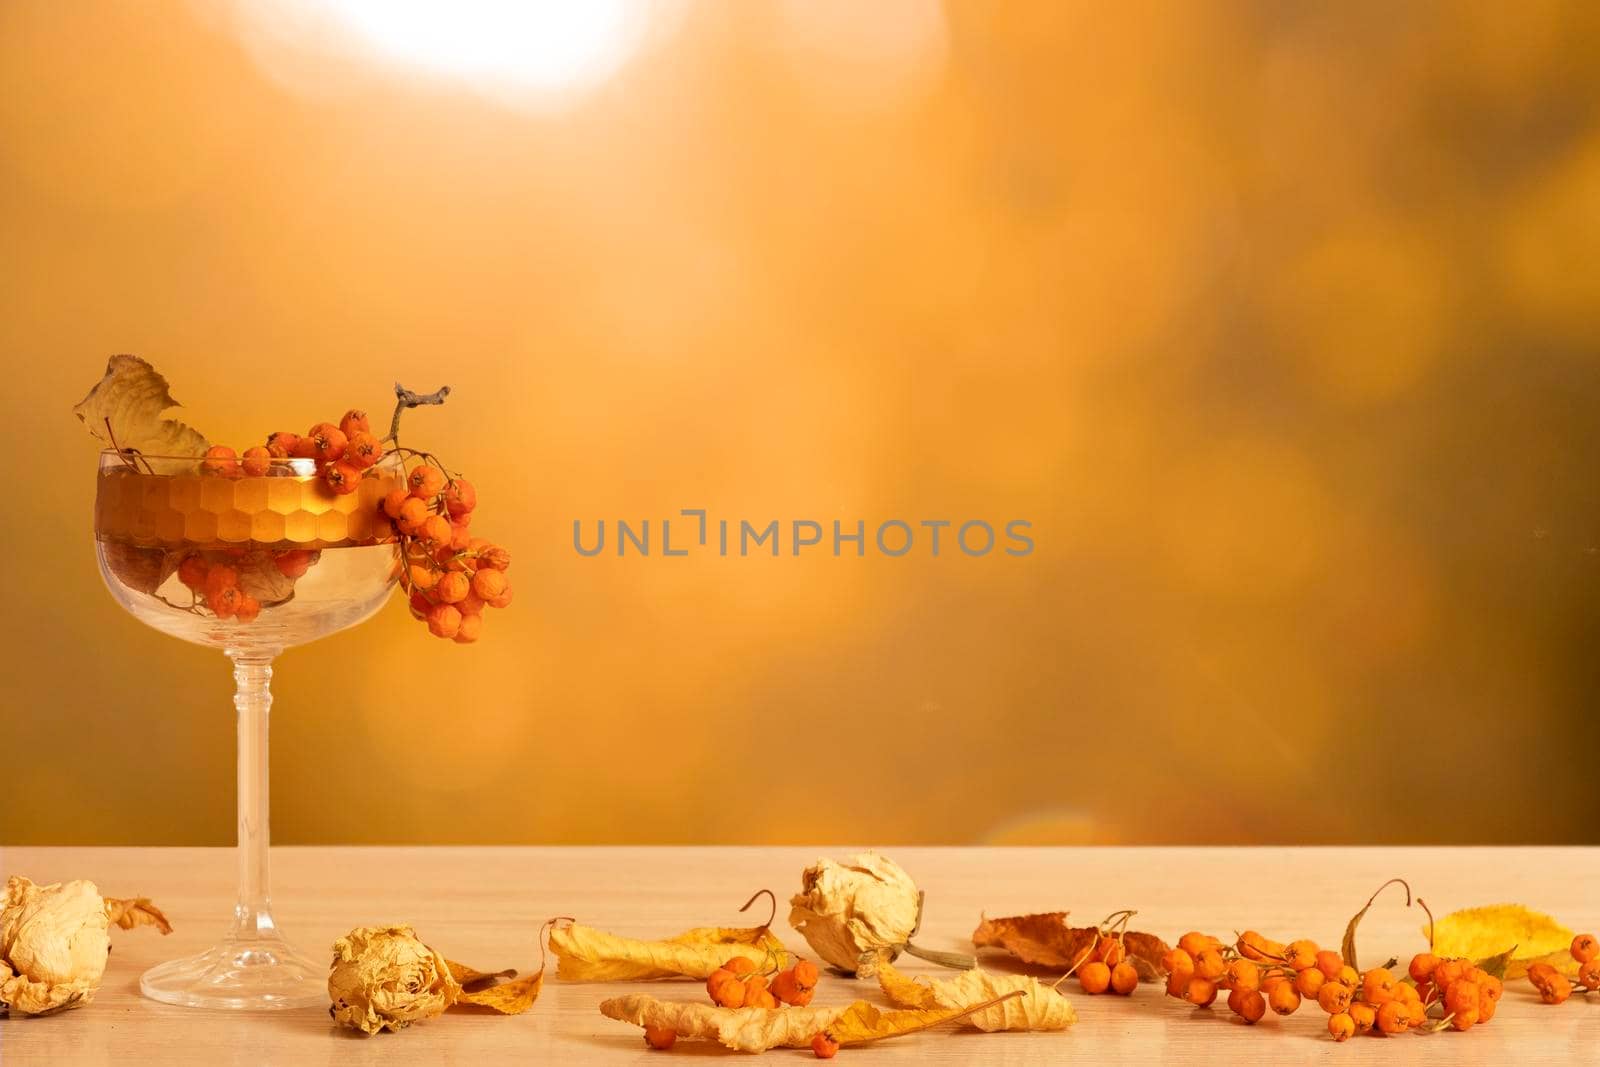 Autumn still life with glass and dry plants on autumn leaf background with sunlight. Abstract autumn composition with copy space